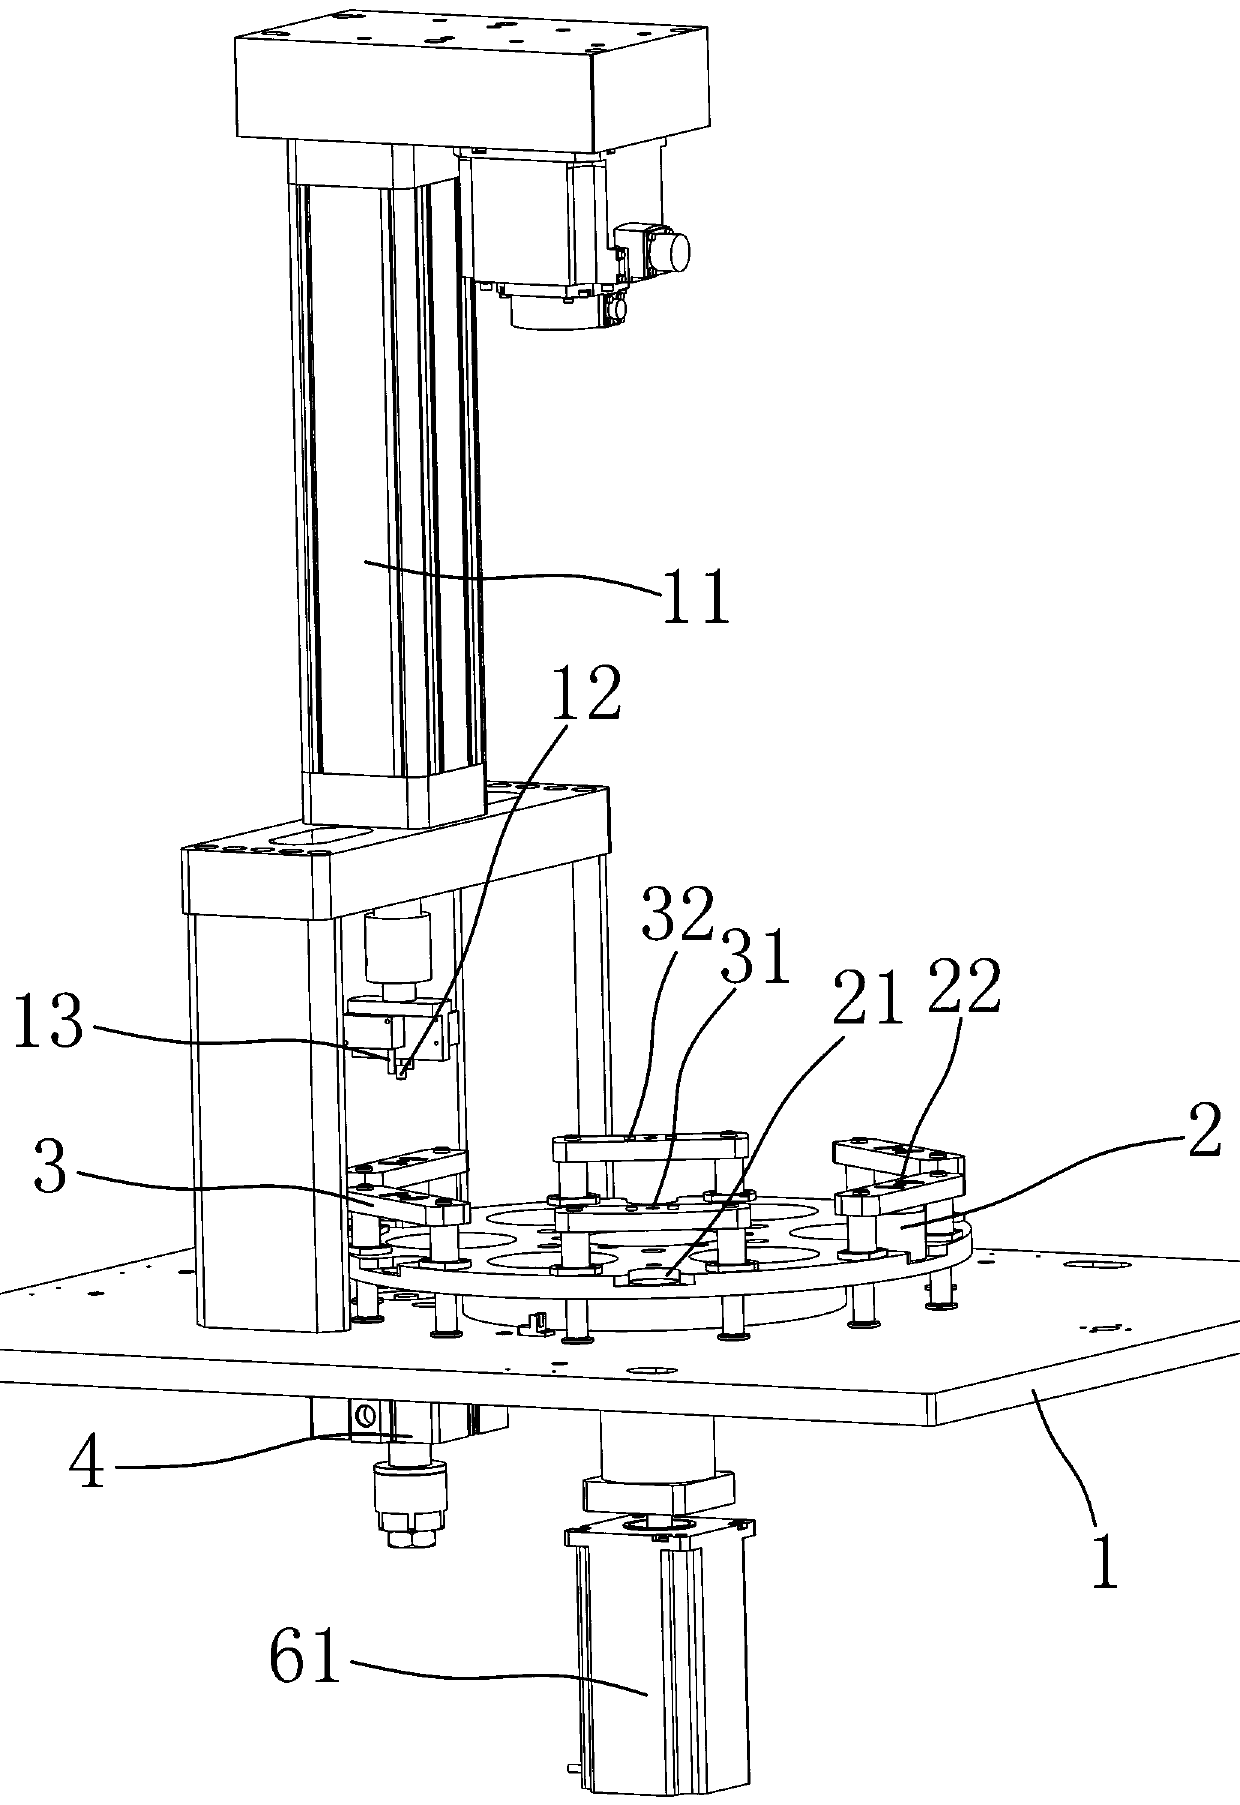 Press fitting device for starting gear on motor shaft